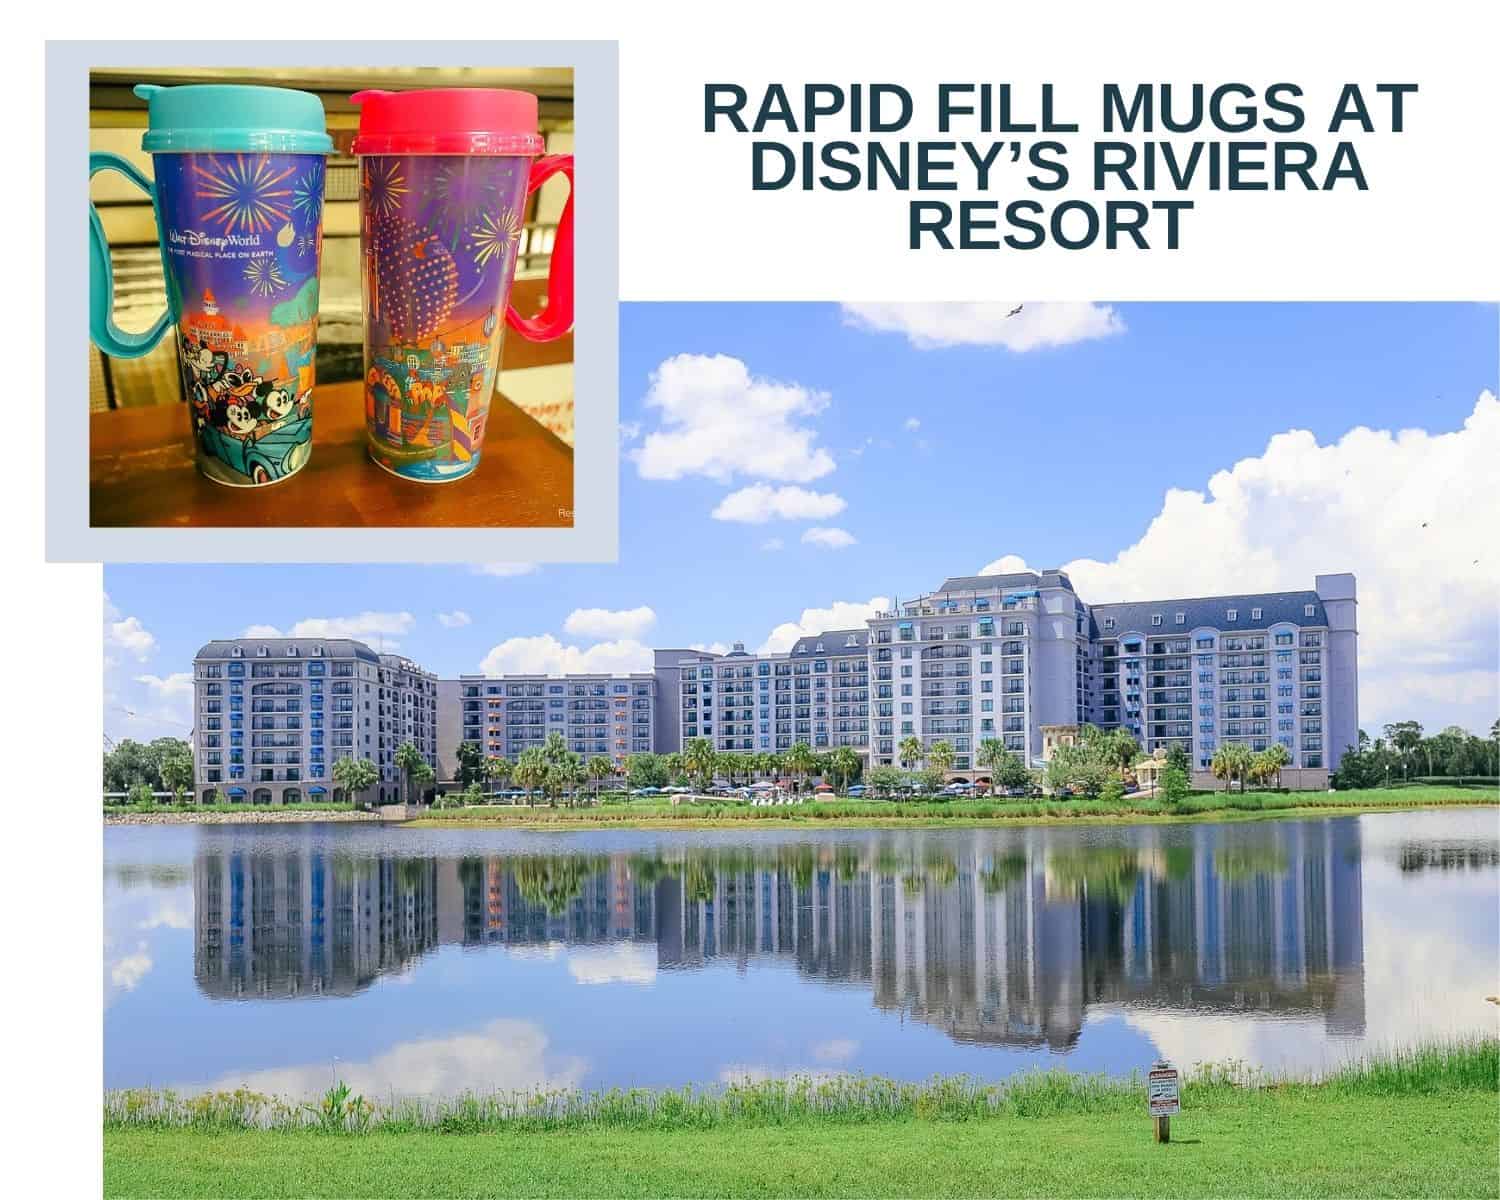 Everything Rapid Fill Mugs at Disney’s Riviera Resort (With Locations & Beverage Options)